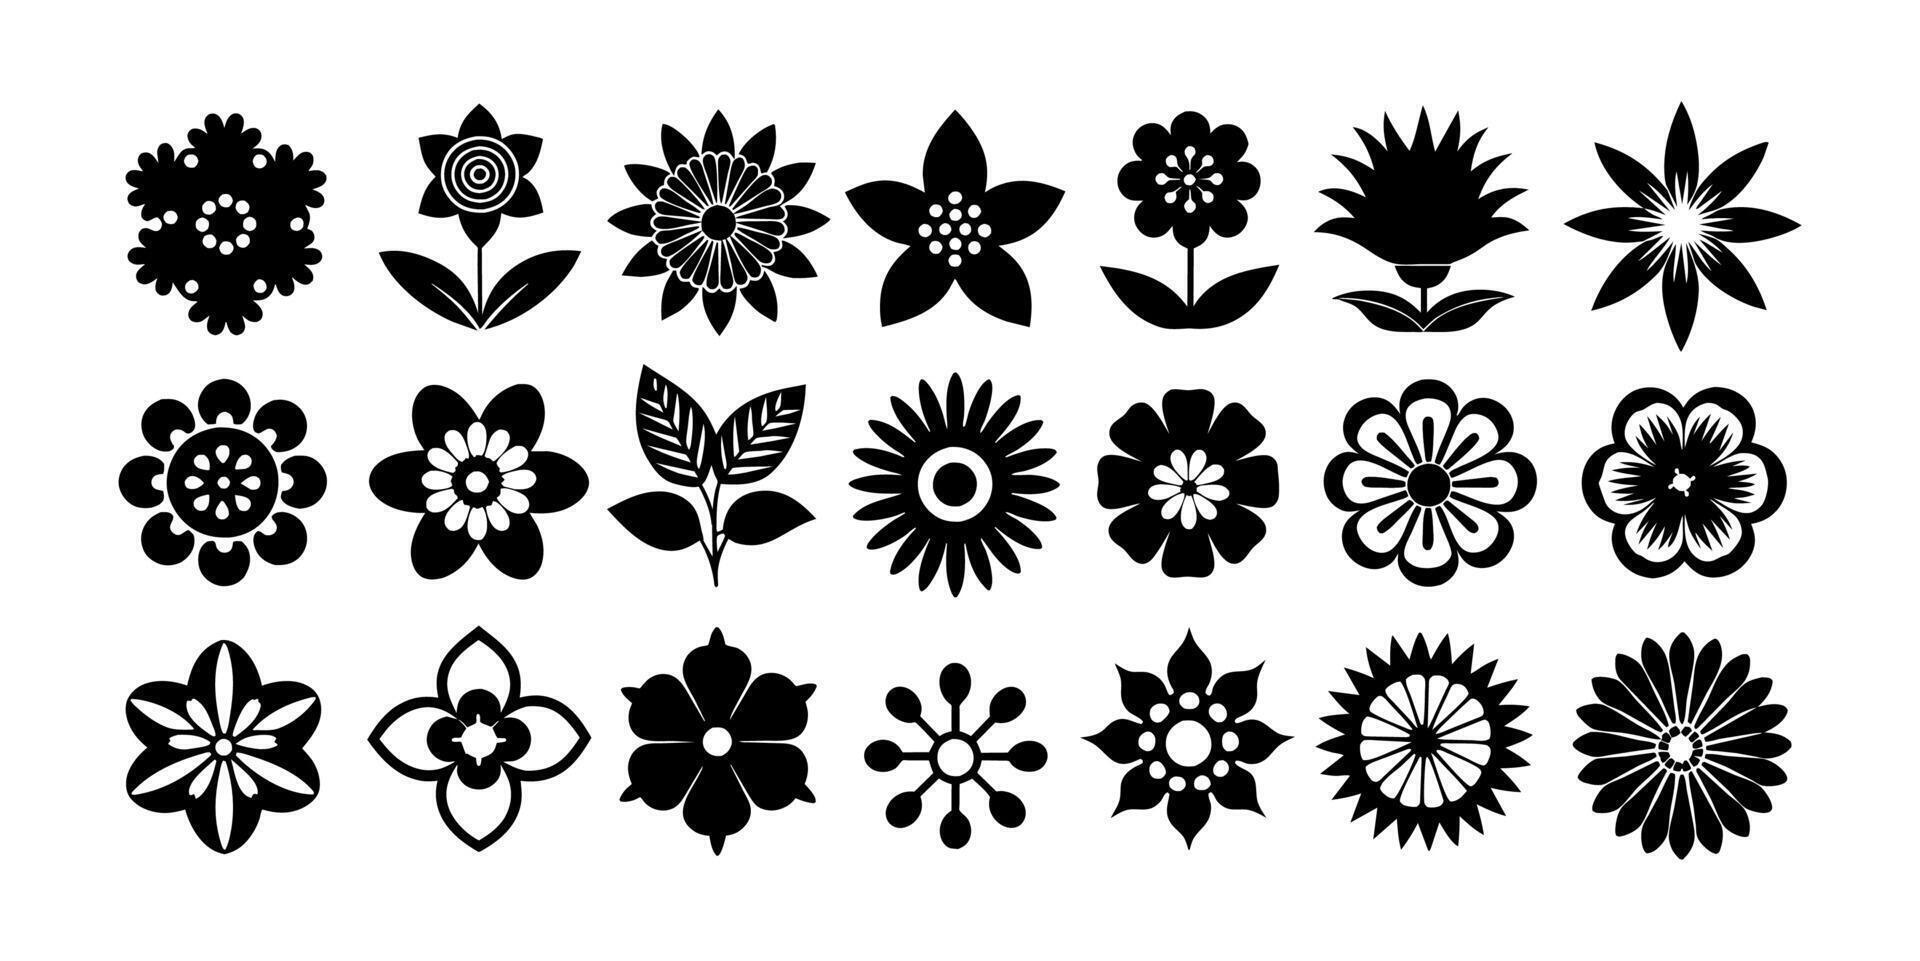 20 silhouette Flower logo or icons set. Abstract flower icons isolated on white background. Flower simple icon vector